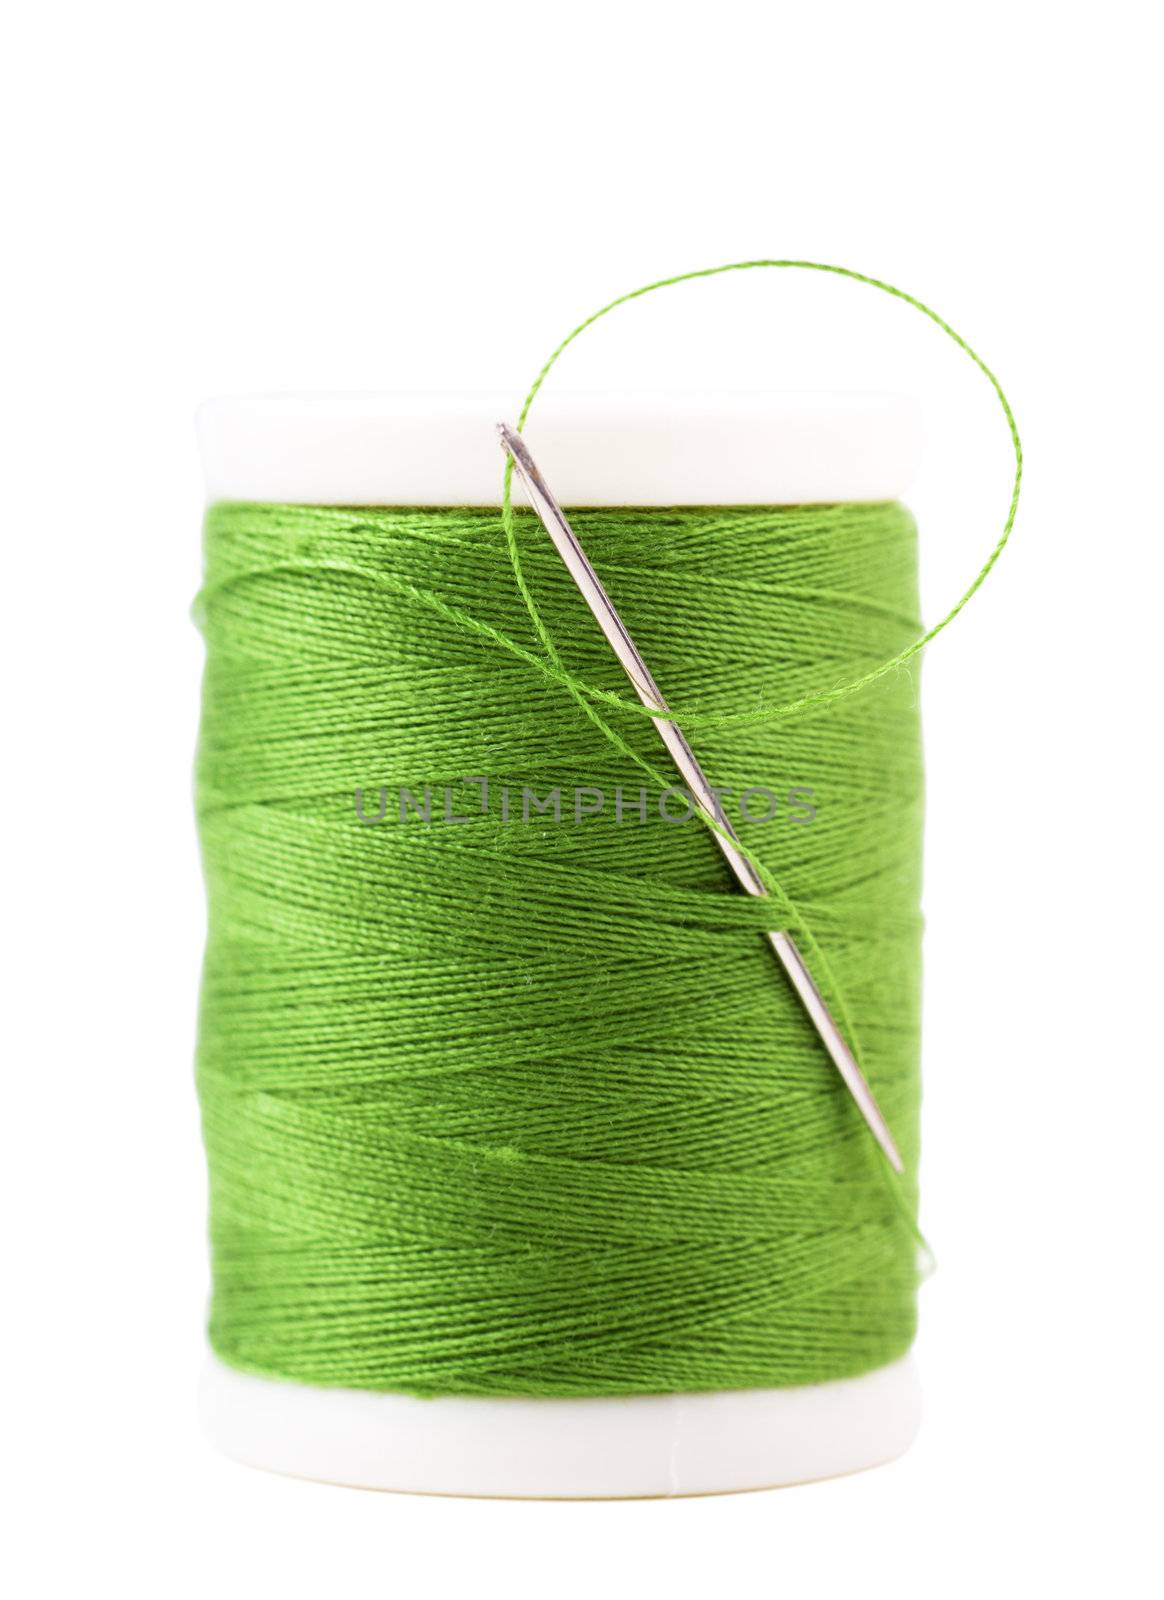 Single spool with green thread and needle